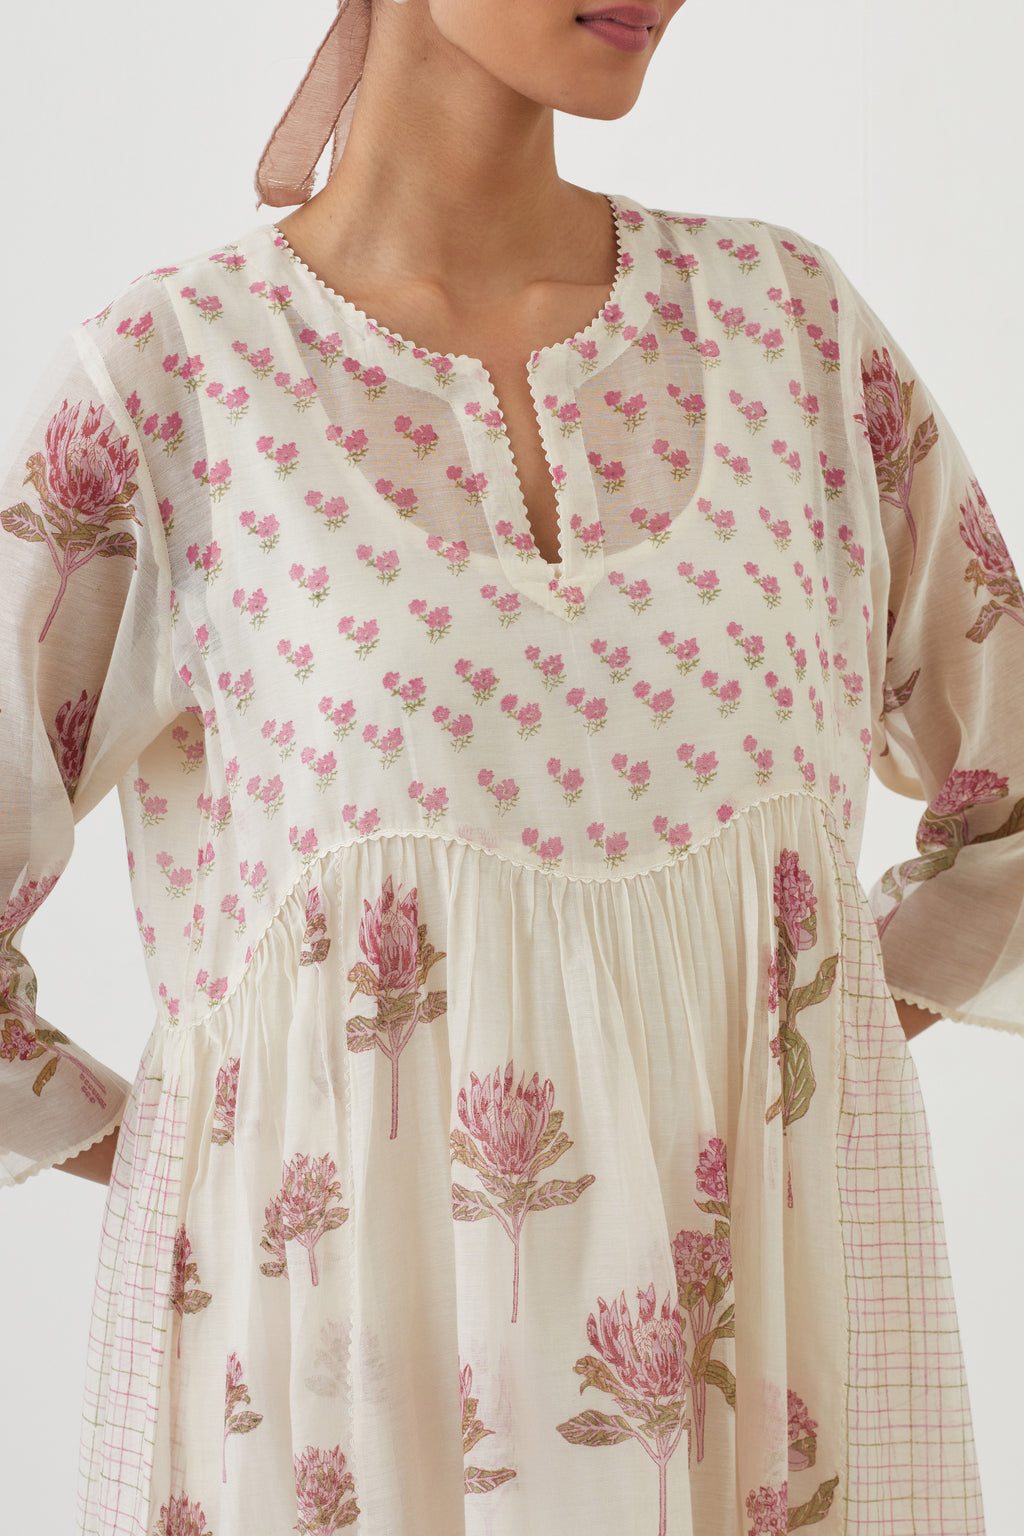 Off white cotton chanderi Kurta dress set  with all-over assorted pink colored floral hand block print.